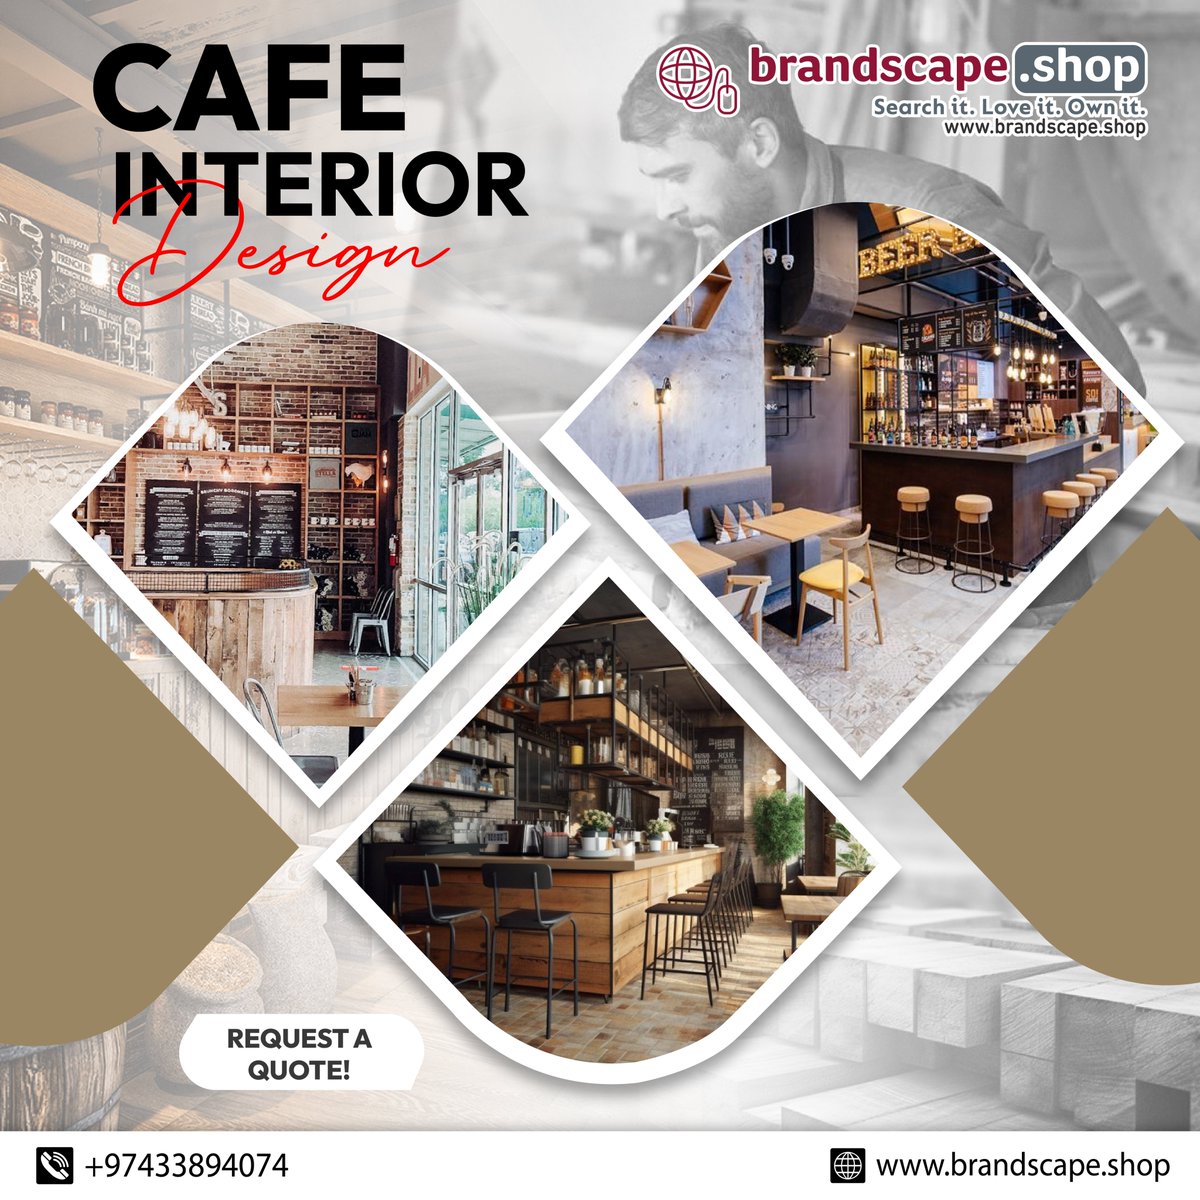 Crafting Atmospheres, Brewing Experiences. Where Every Sip Is A Stroke Of Inspiration.

Shop at brandscape.shop/collections/bu…

Click here for brandscape.shop/collections/bu…

For More Inquiries Contact
33894074

#cafedesign #cafeteria #interiordesigntrends #RestaurantDesign #design #qatar